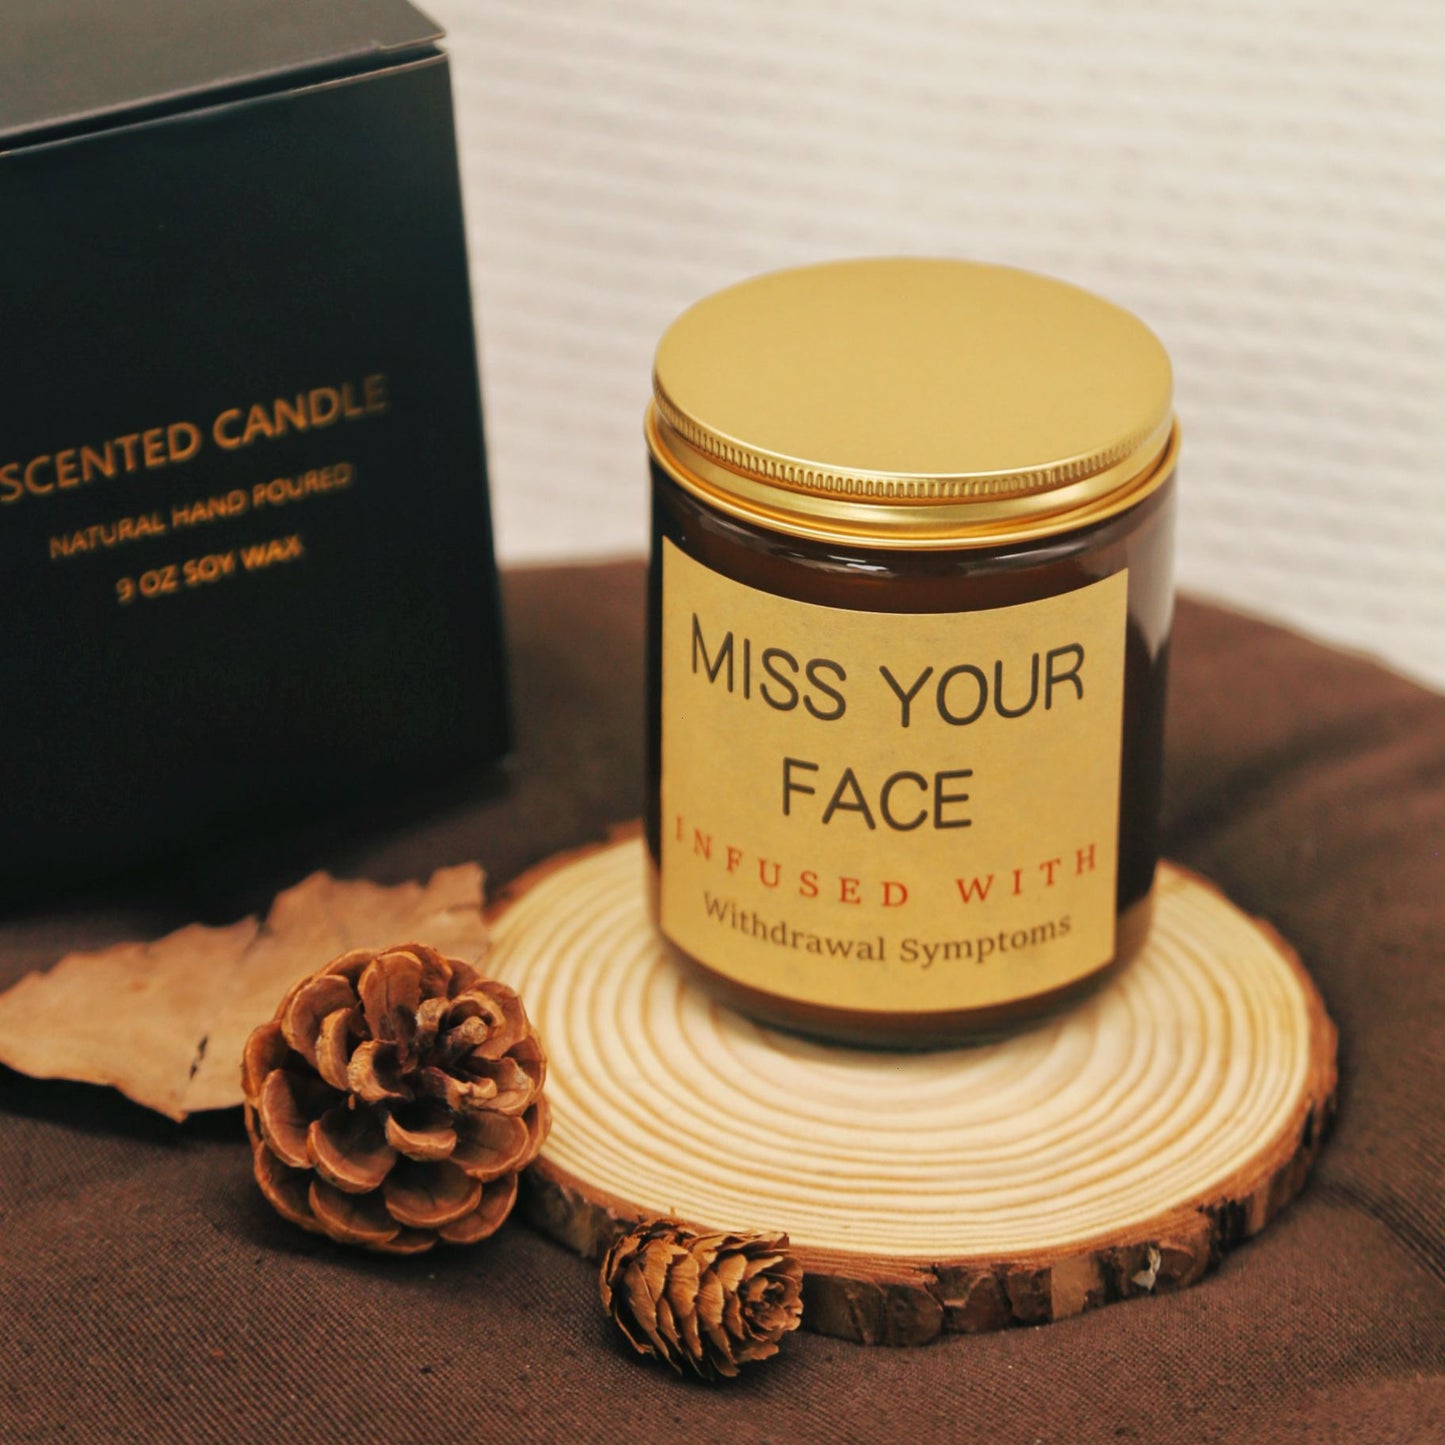 "Miss Your Face" Aroma Candle Gift